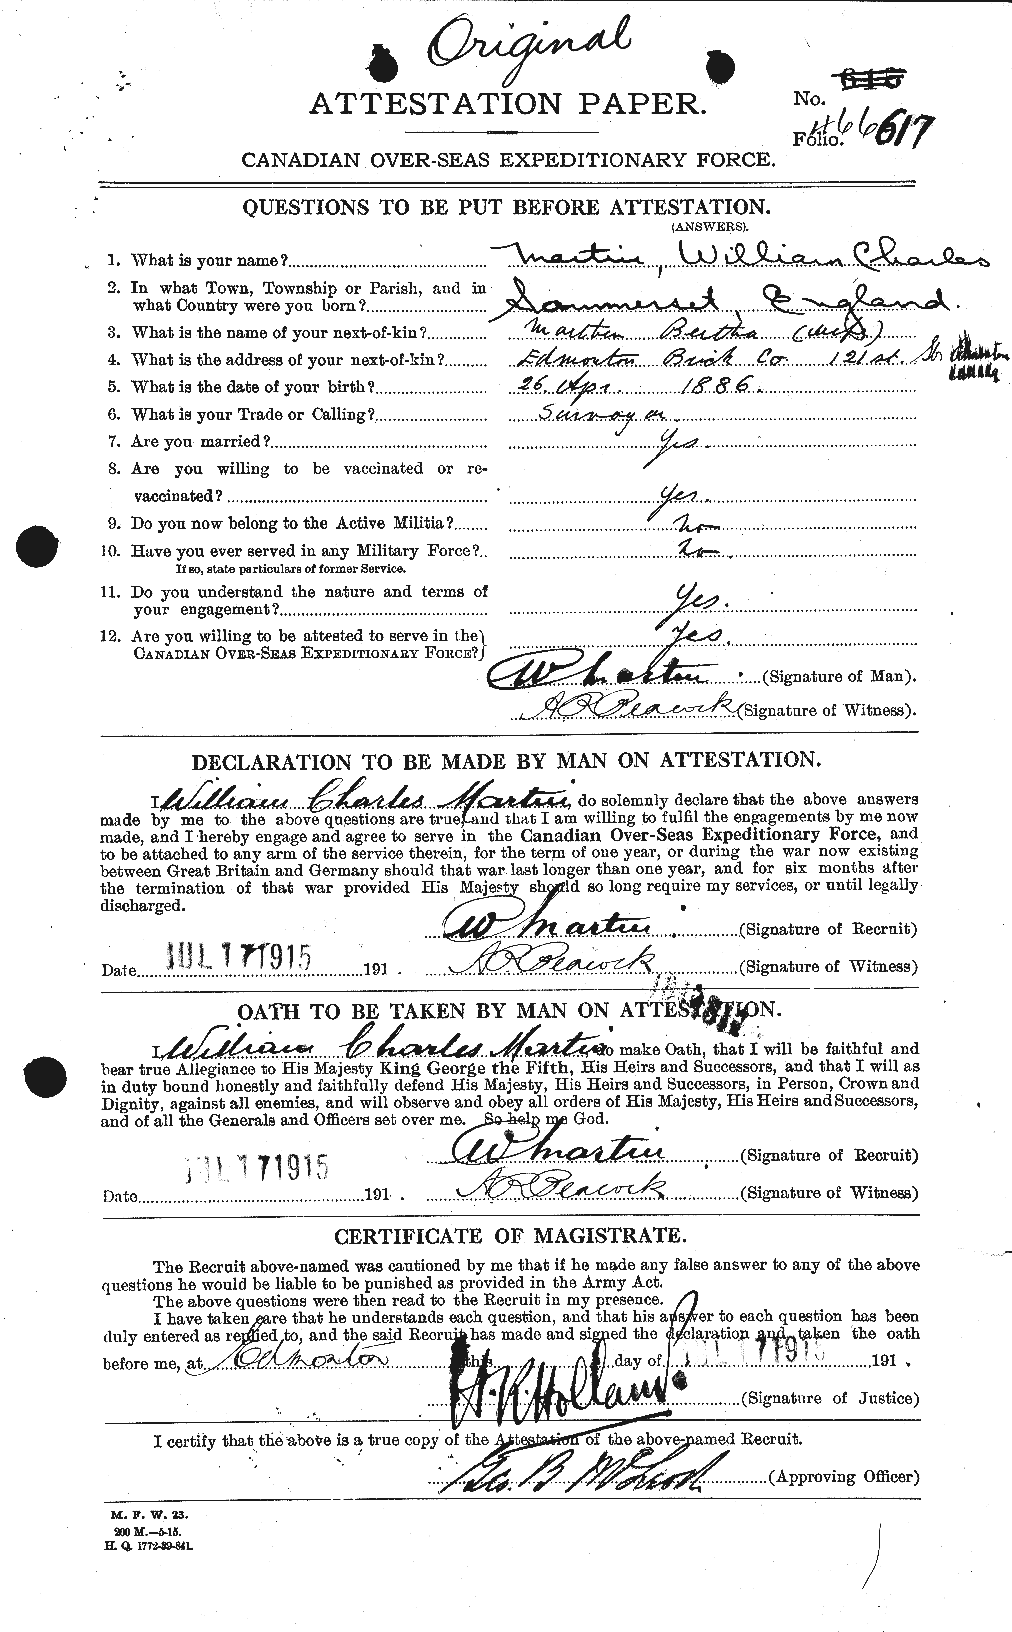 Personnel Records of the First World War - CEF 485751a